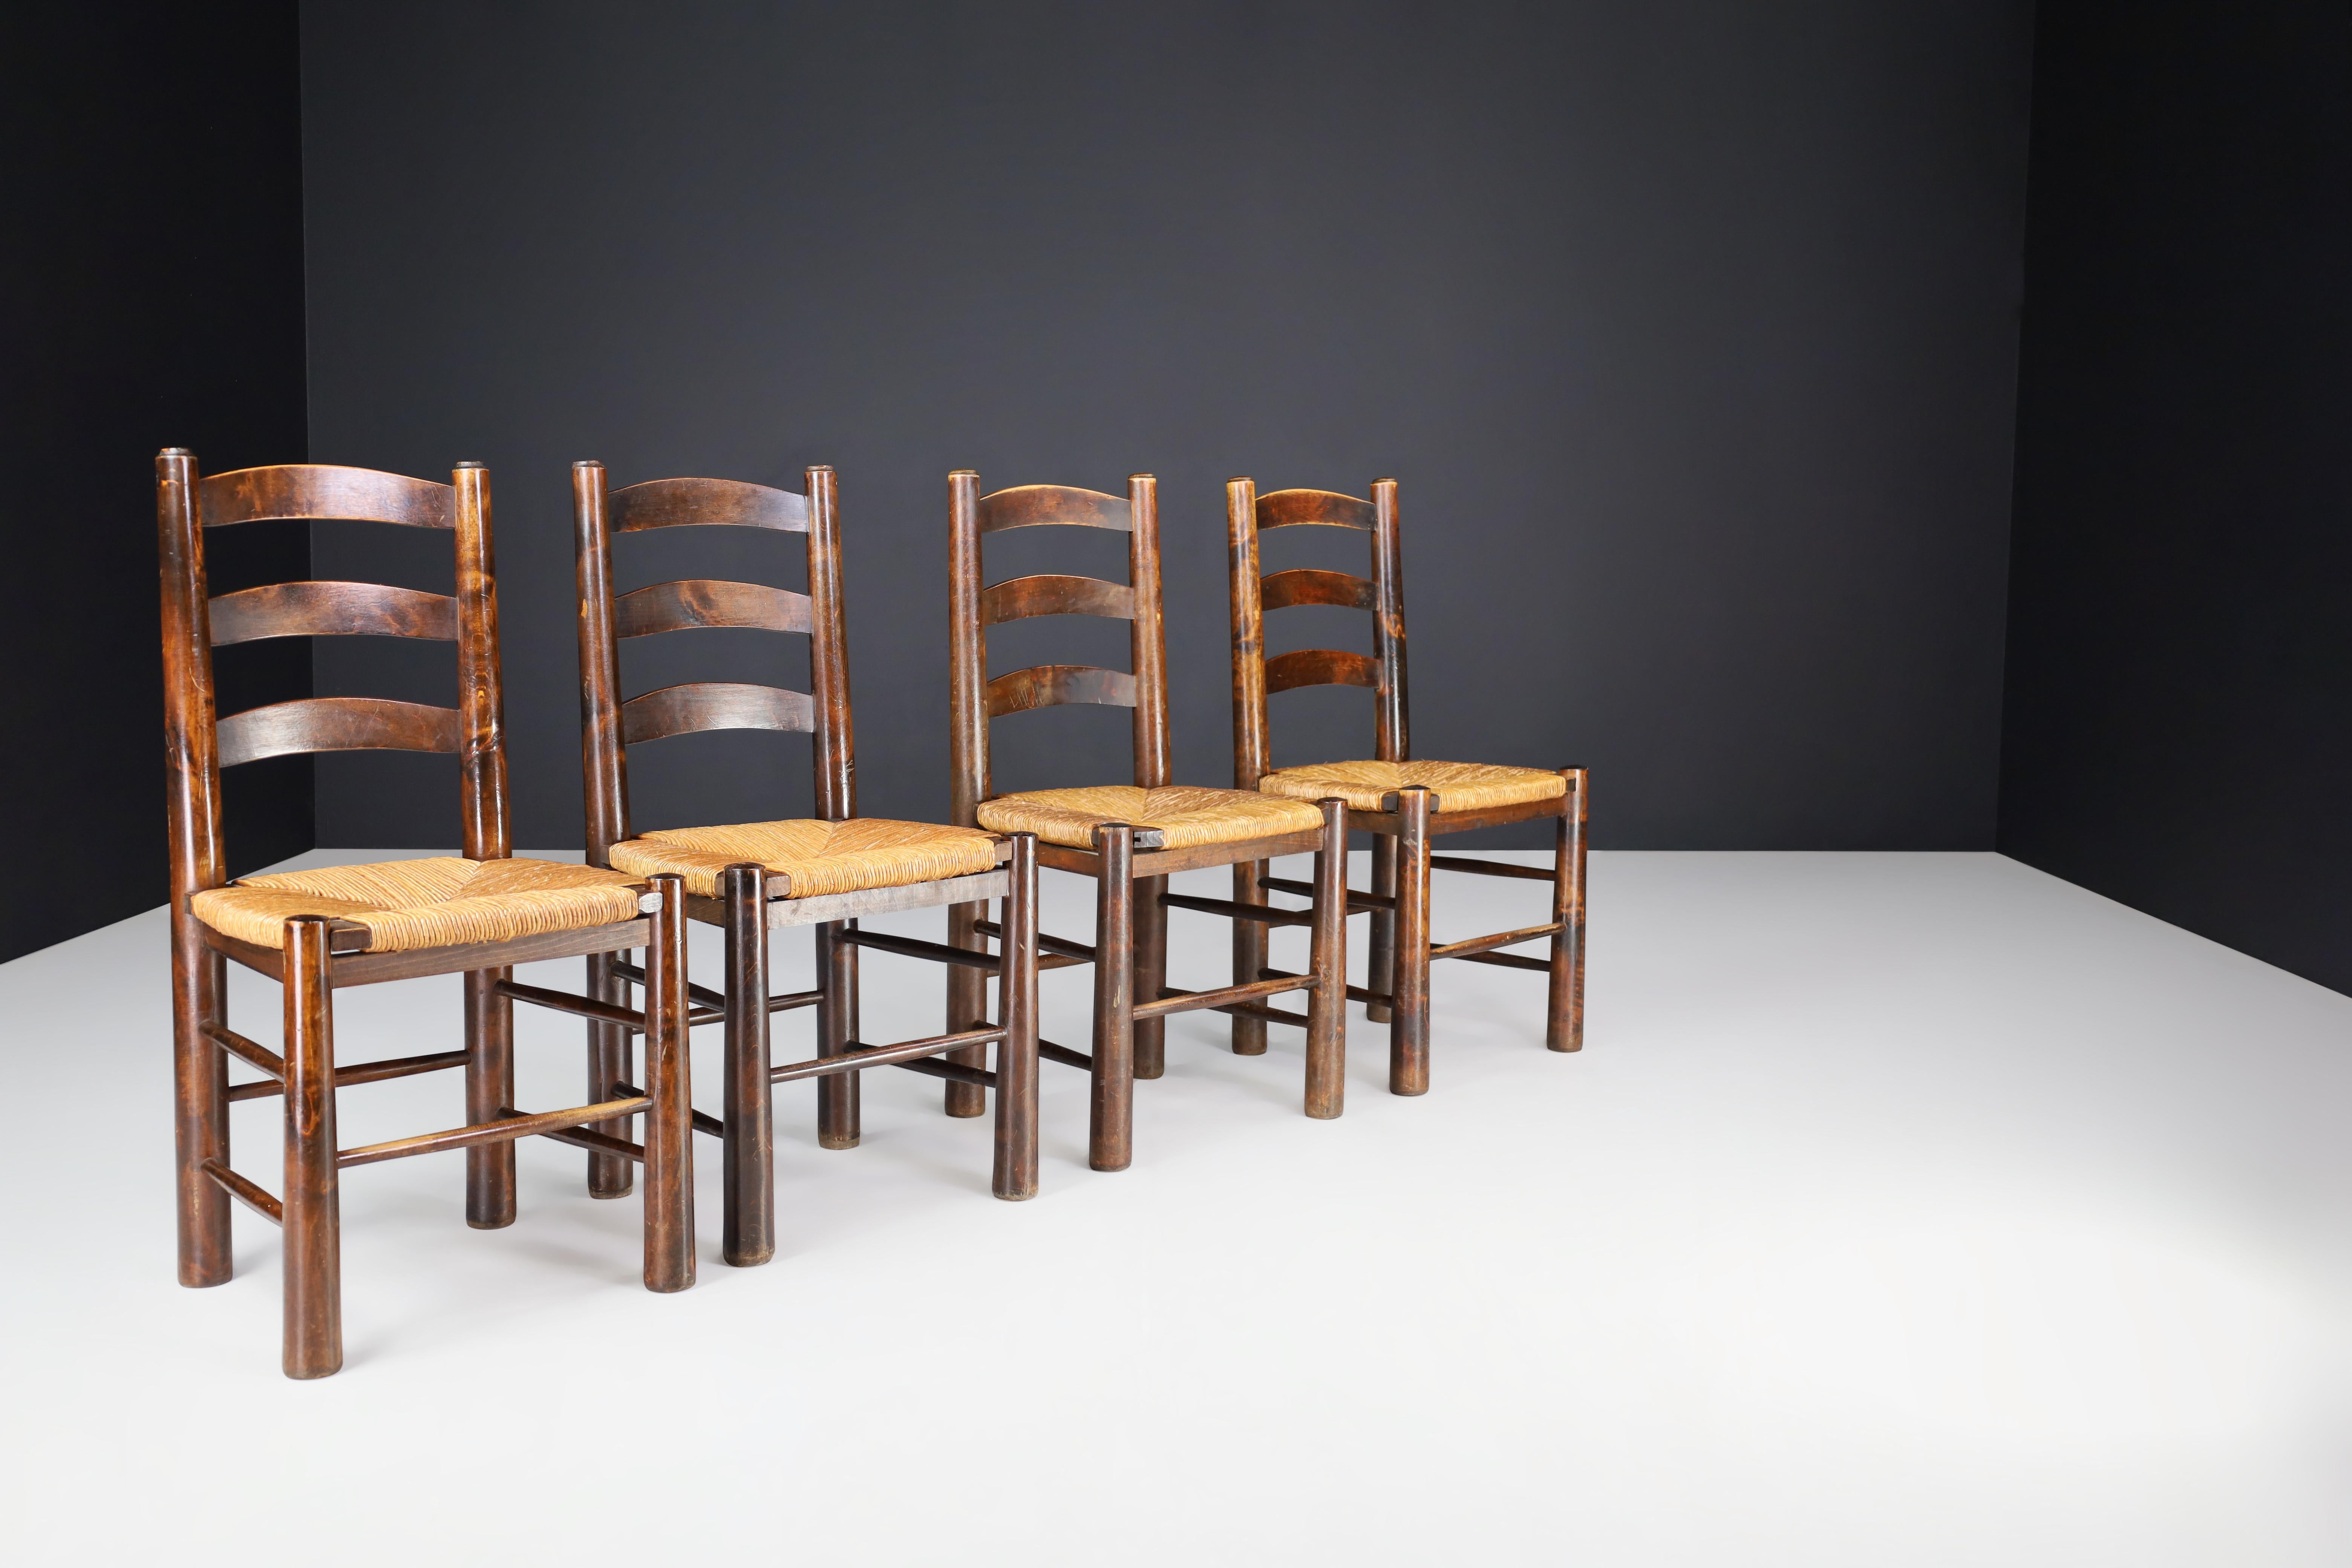 Georges Robert Dining Chairs in Patinated Oak and Rush, France, 1950s For Sale 1